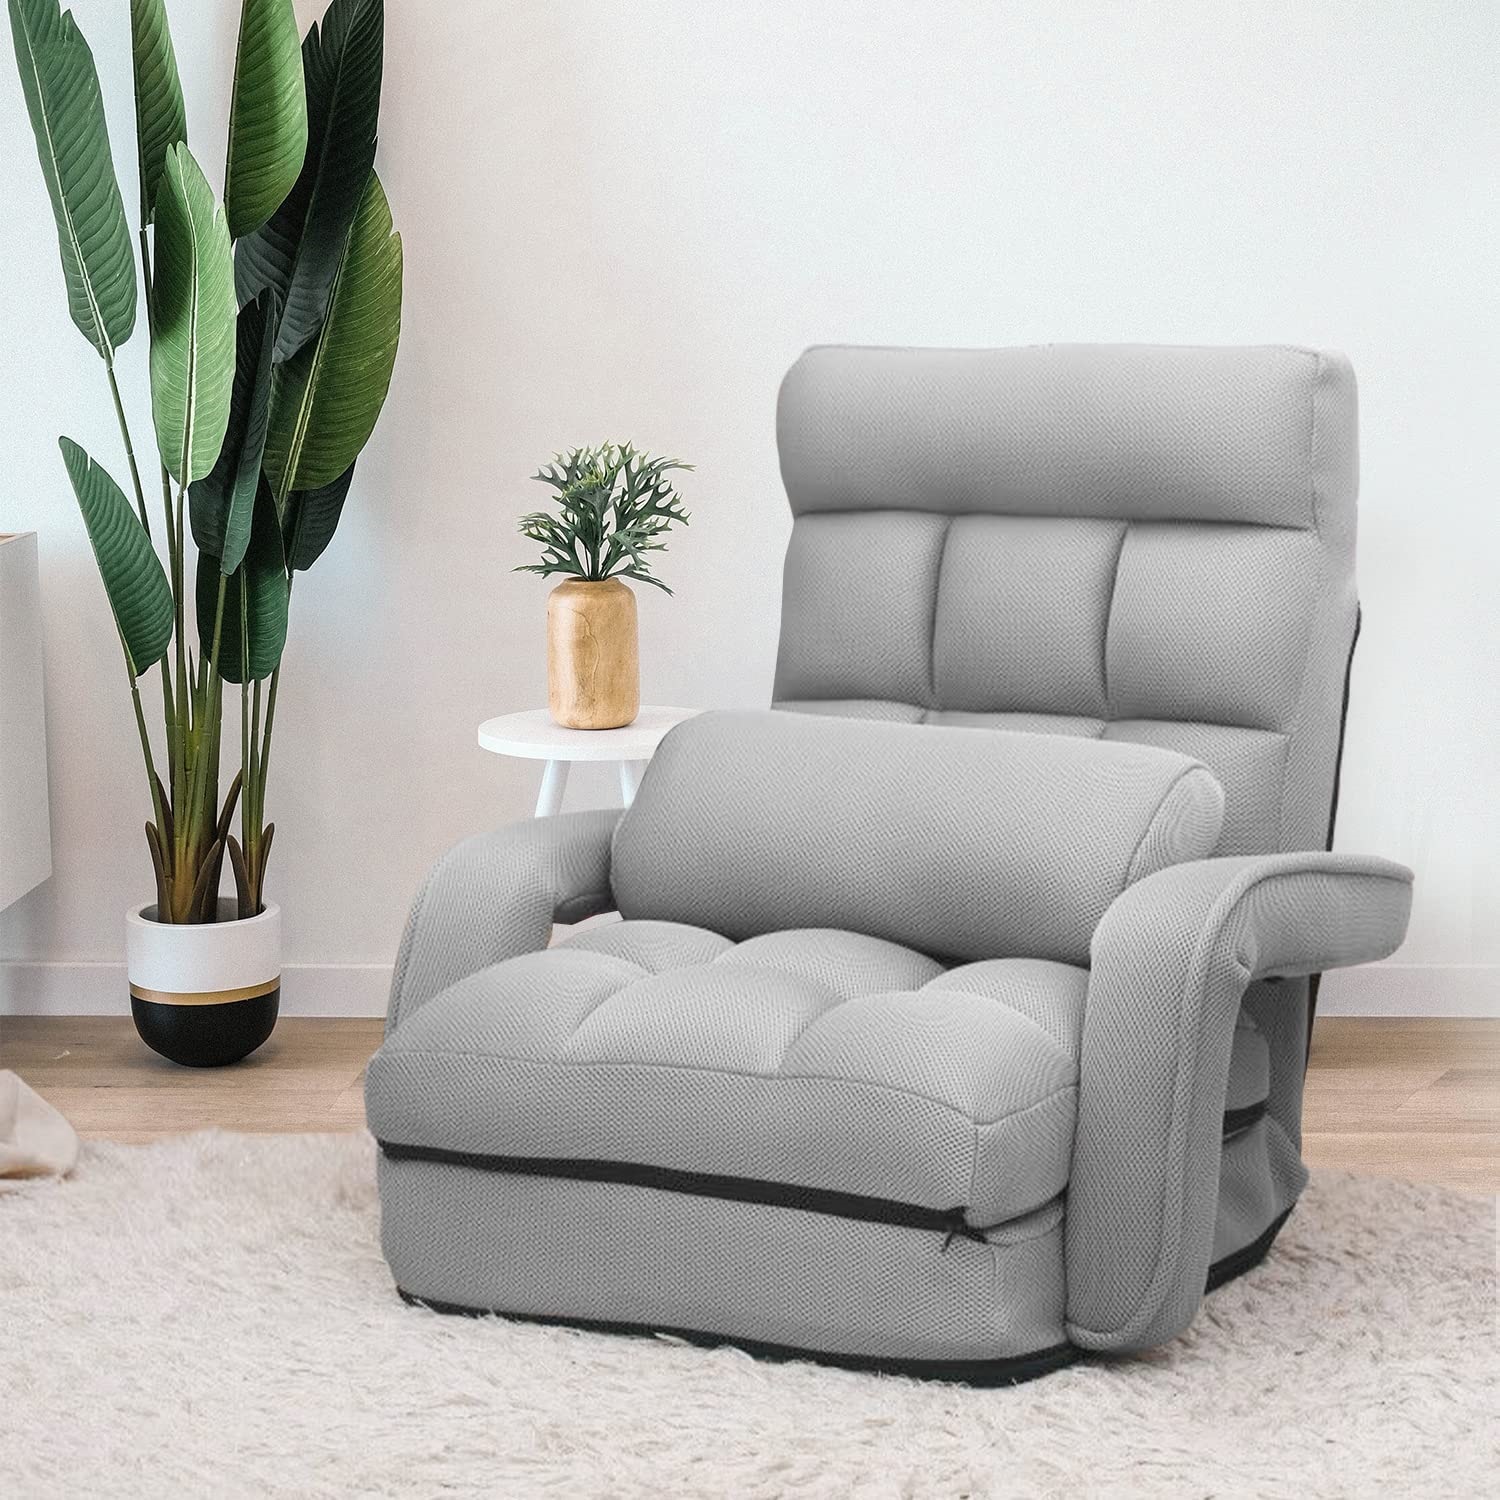 Indoor Chaise Lounge Chair, WAYTRIM Floor Chair for Adults